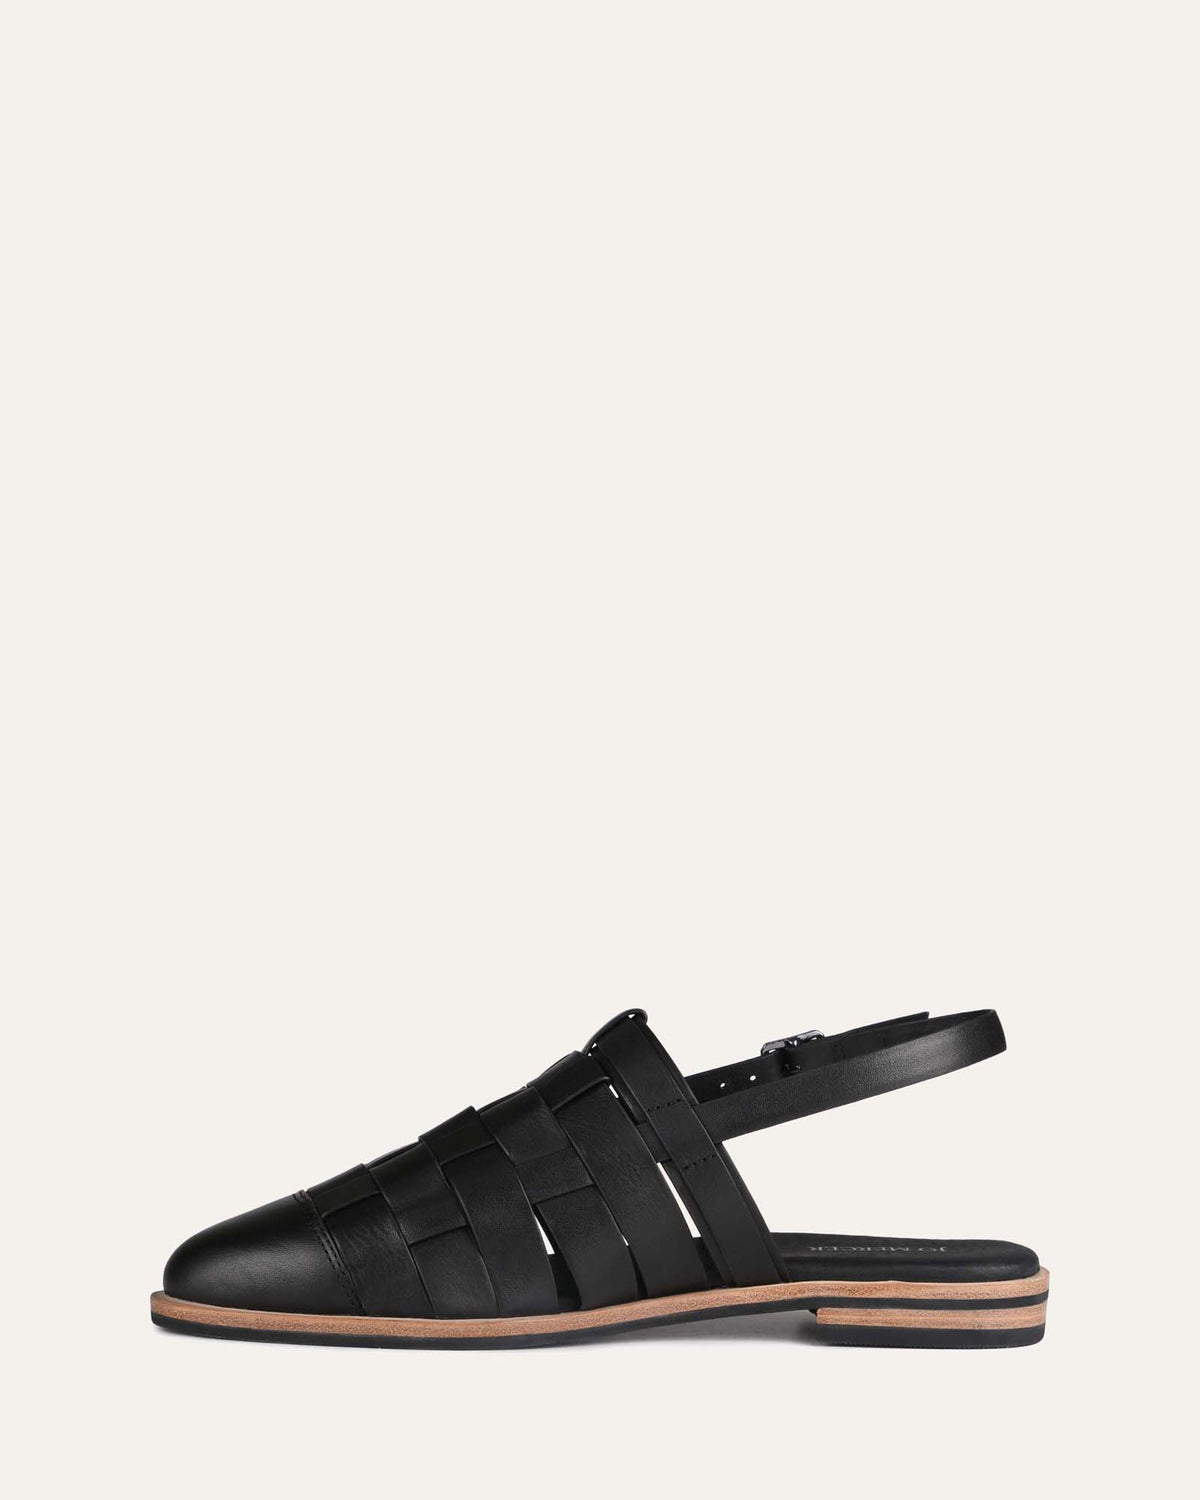 WALKER CASUAL FLATS BLACK LEATHER